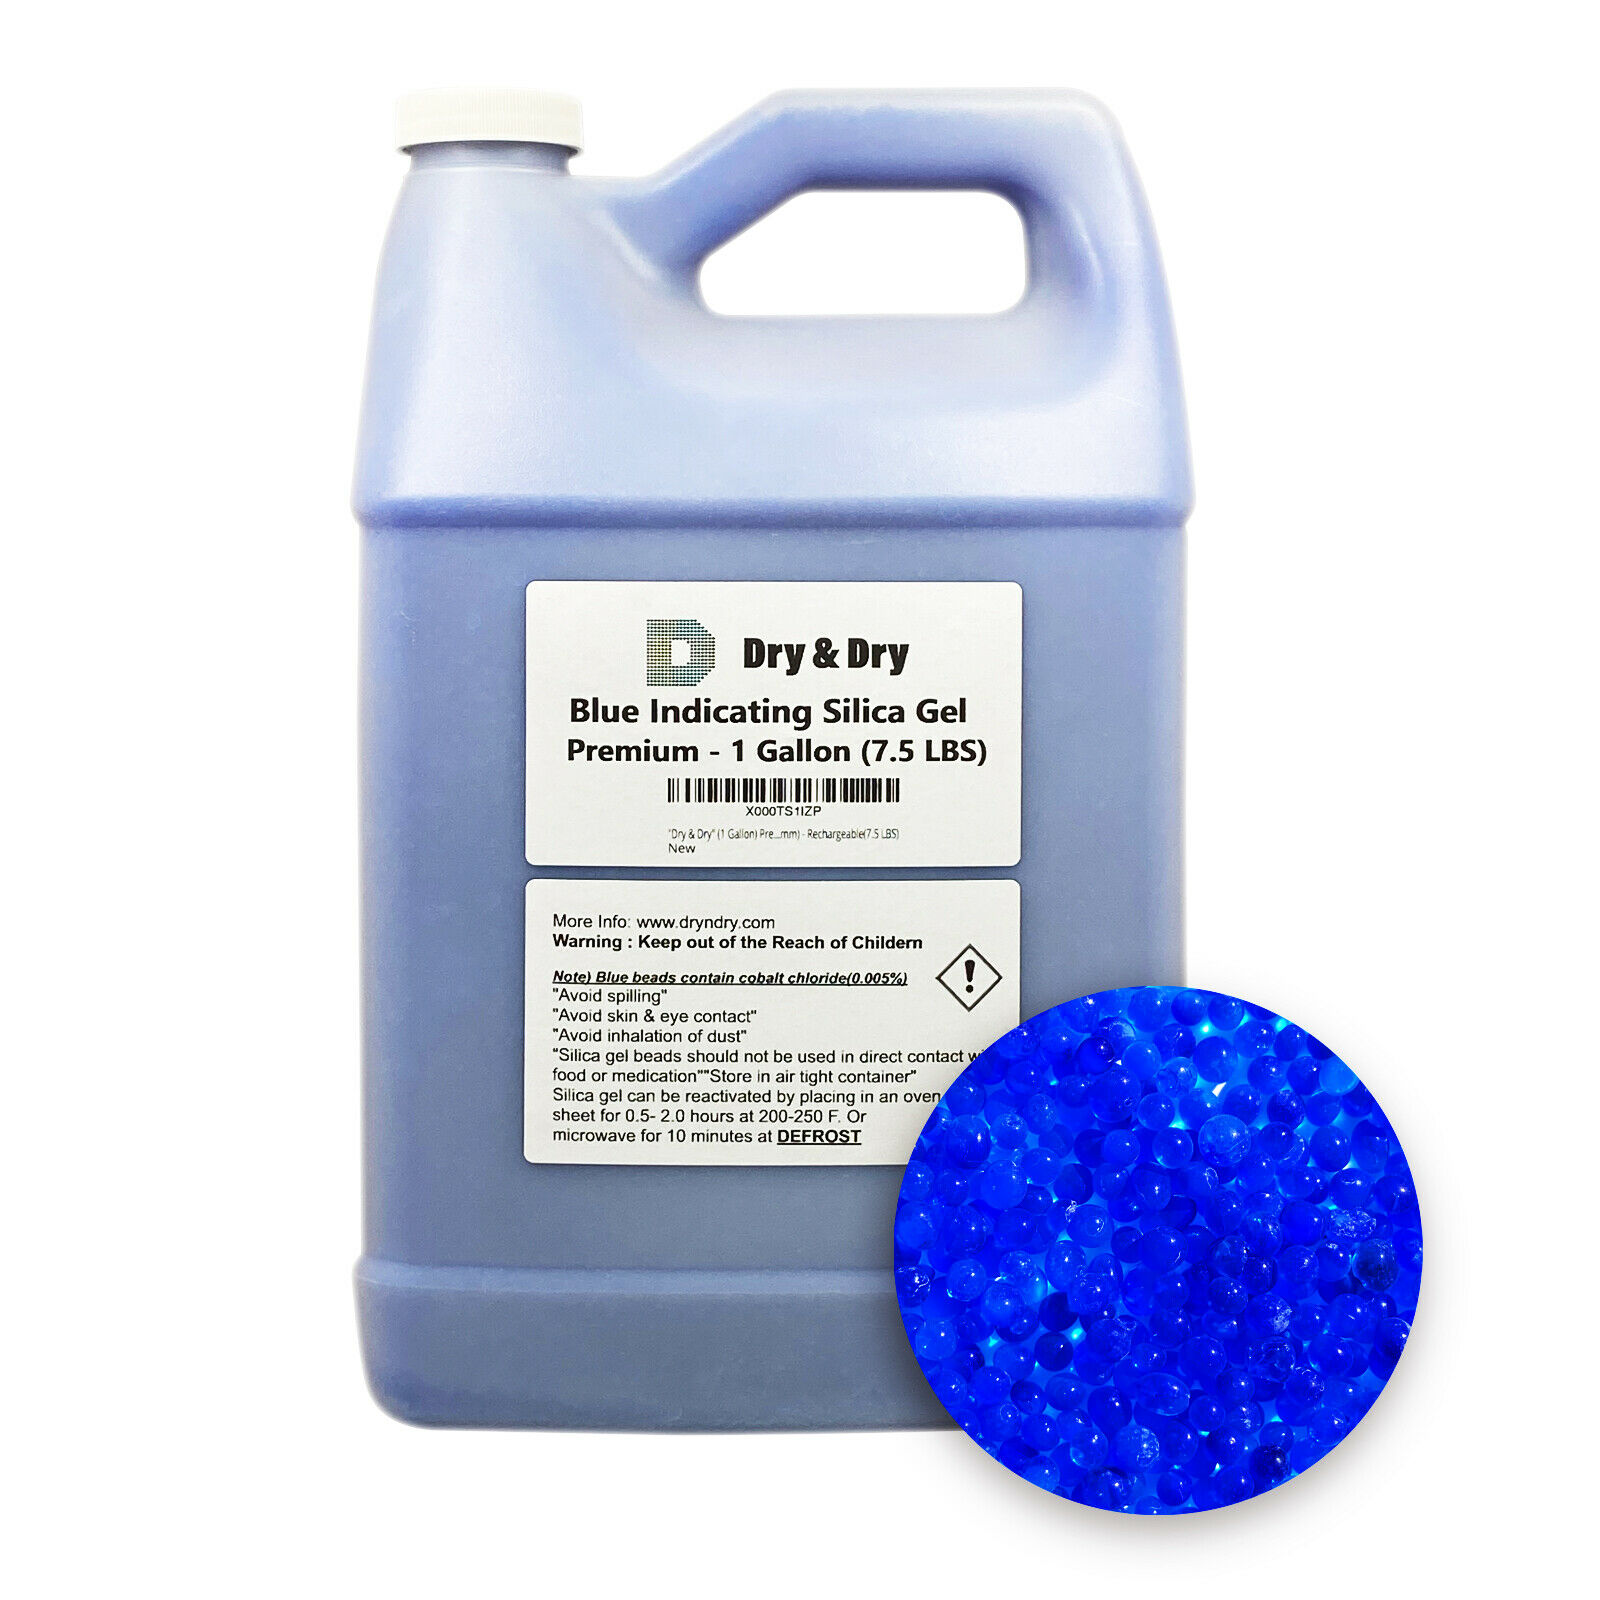 1 Gallon(7.5 Lbs) "dry & Dry" Premium Blue Indicating Silica Gel Desiccant Beads